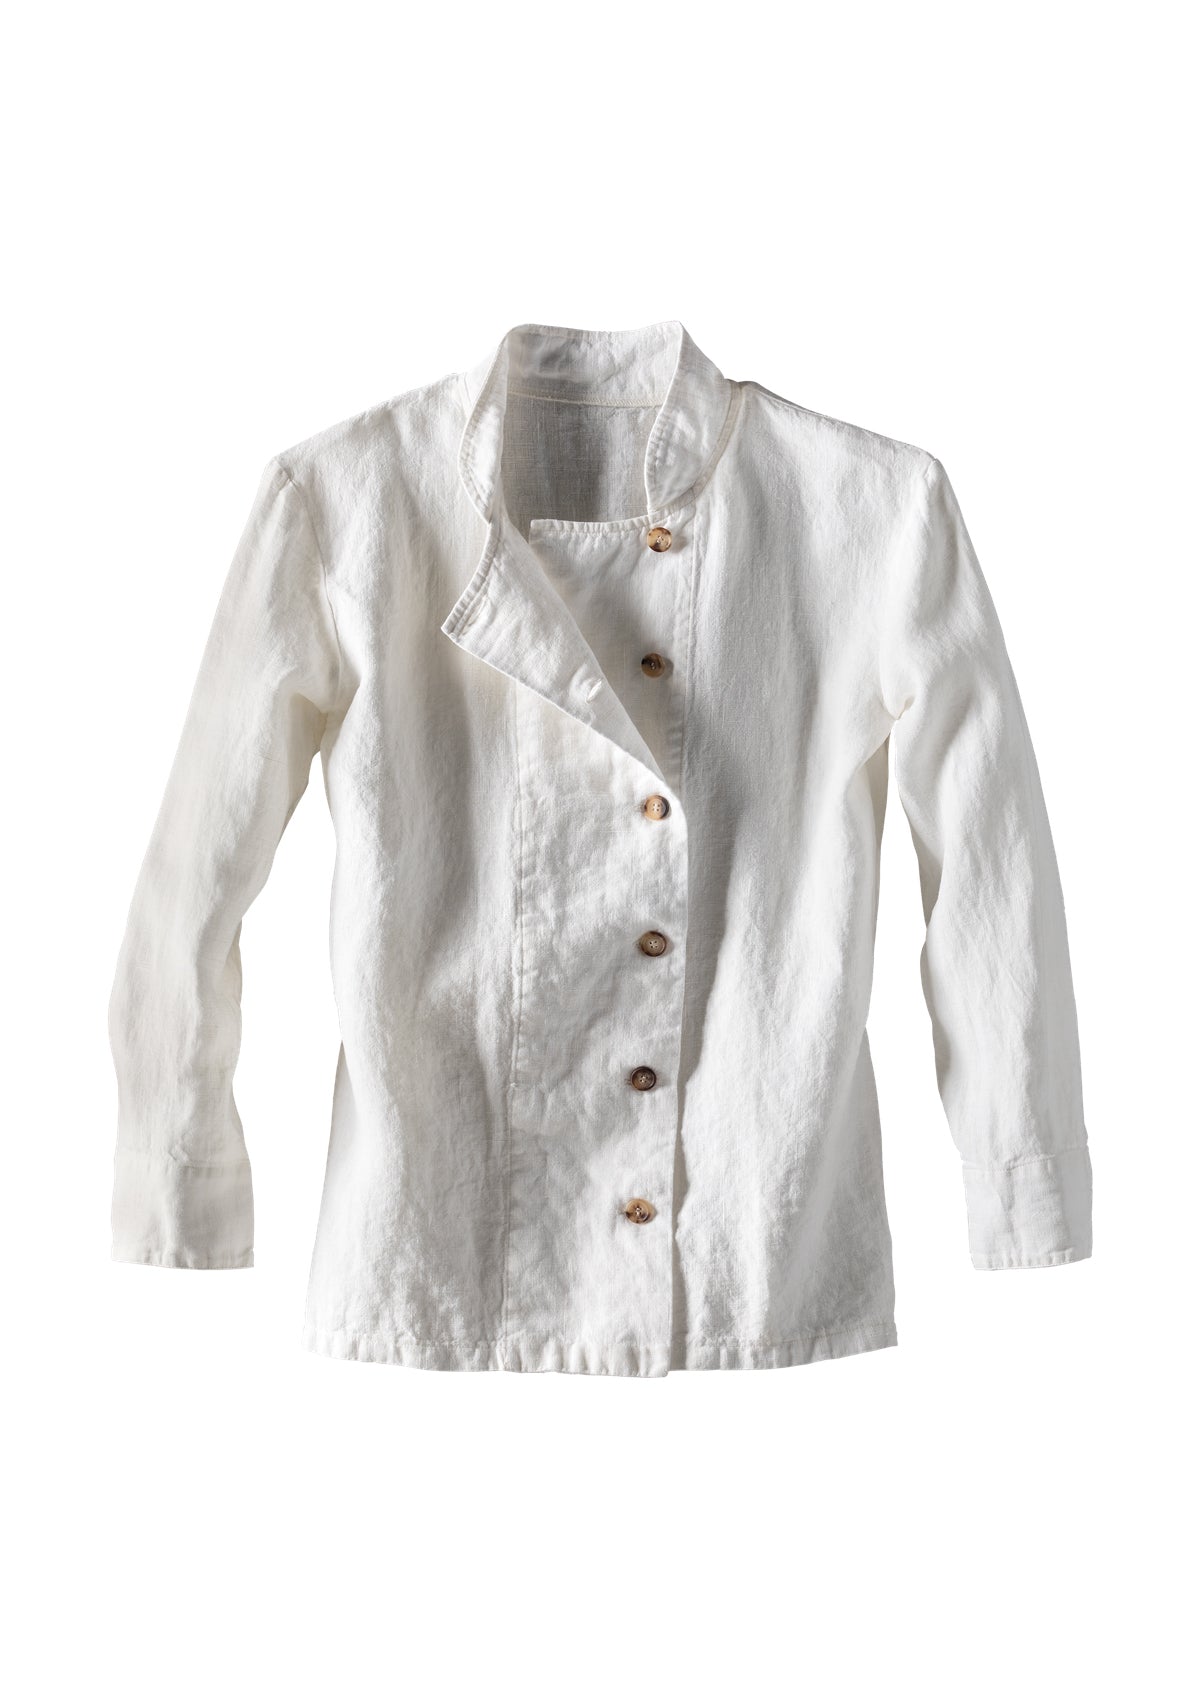 Unisex Double-Breasted Chef's Jacket Bristol In Fine Linen